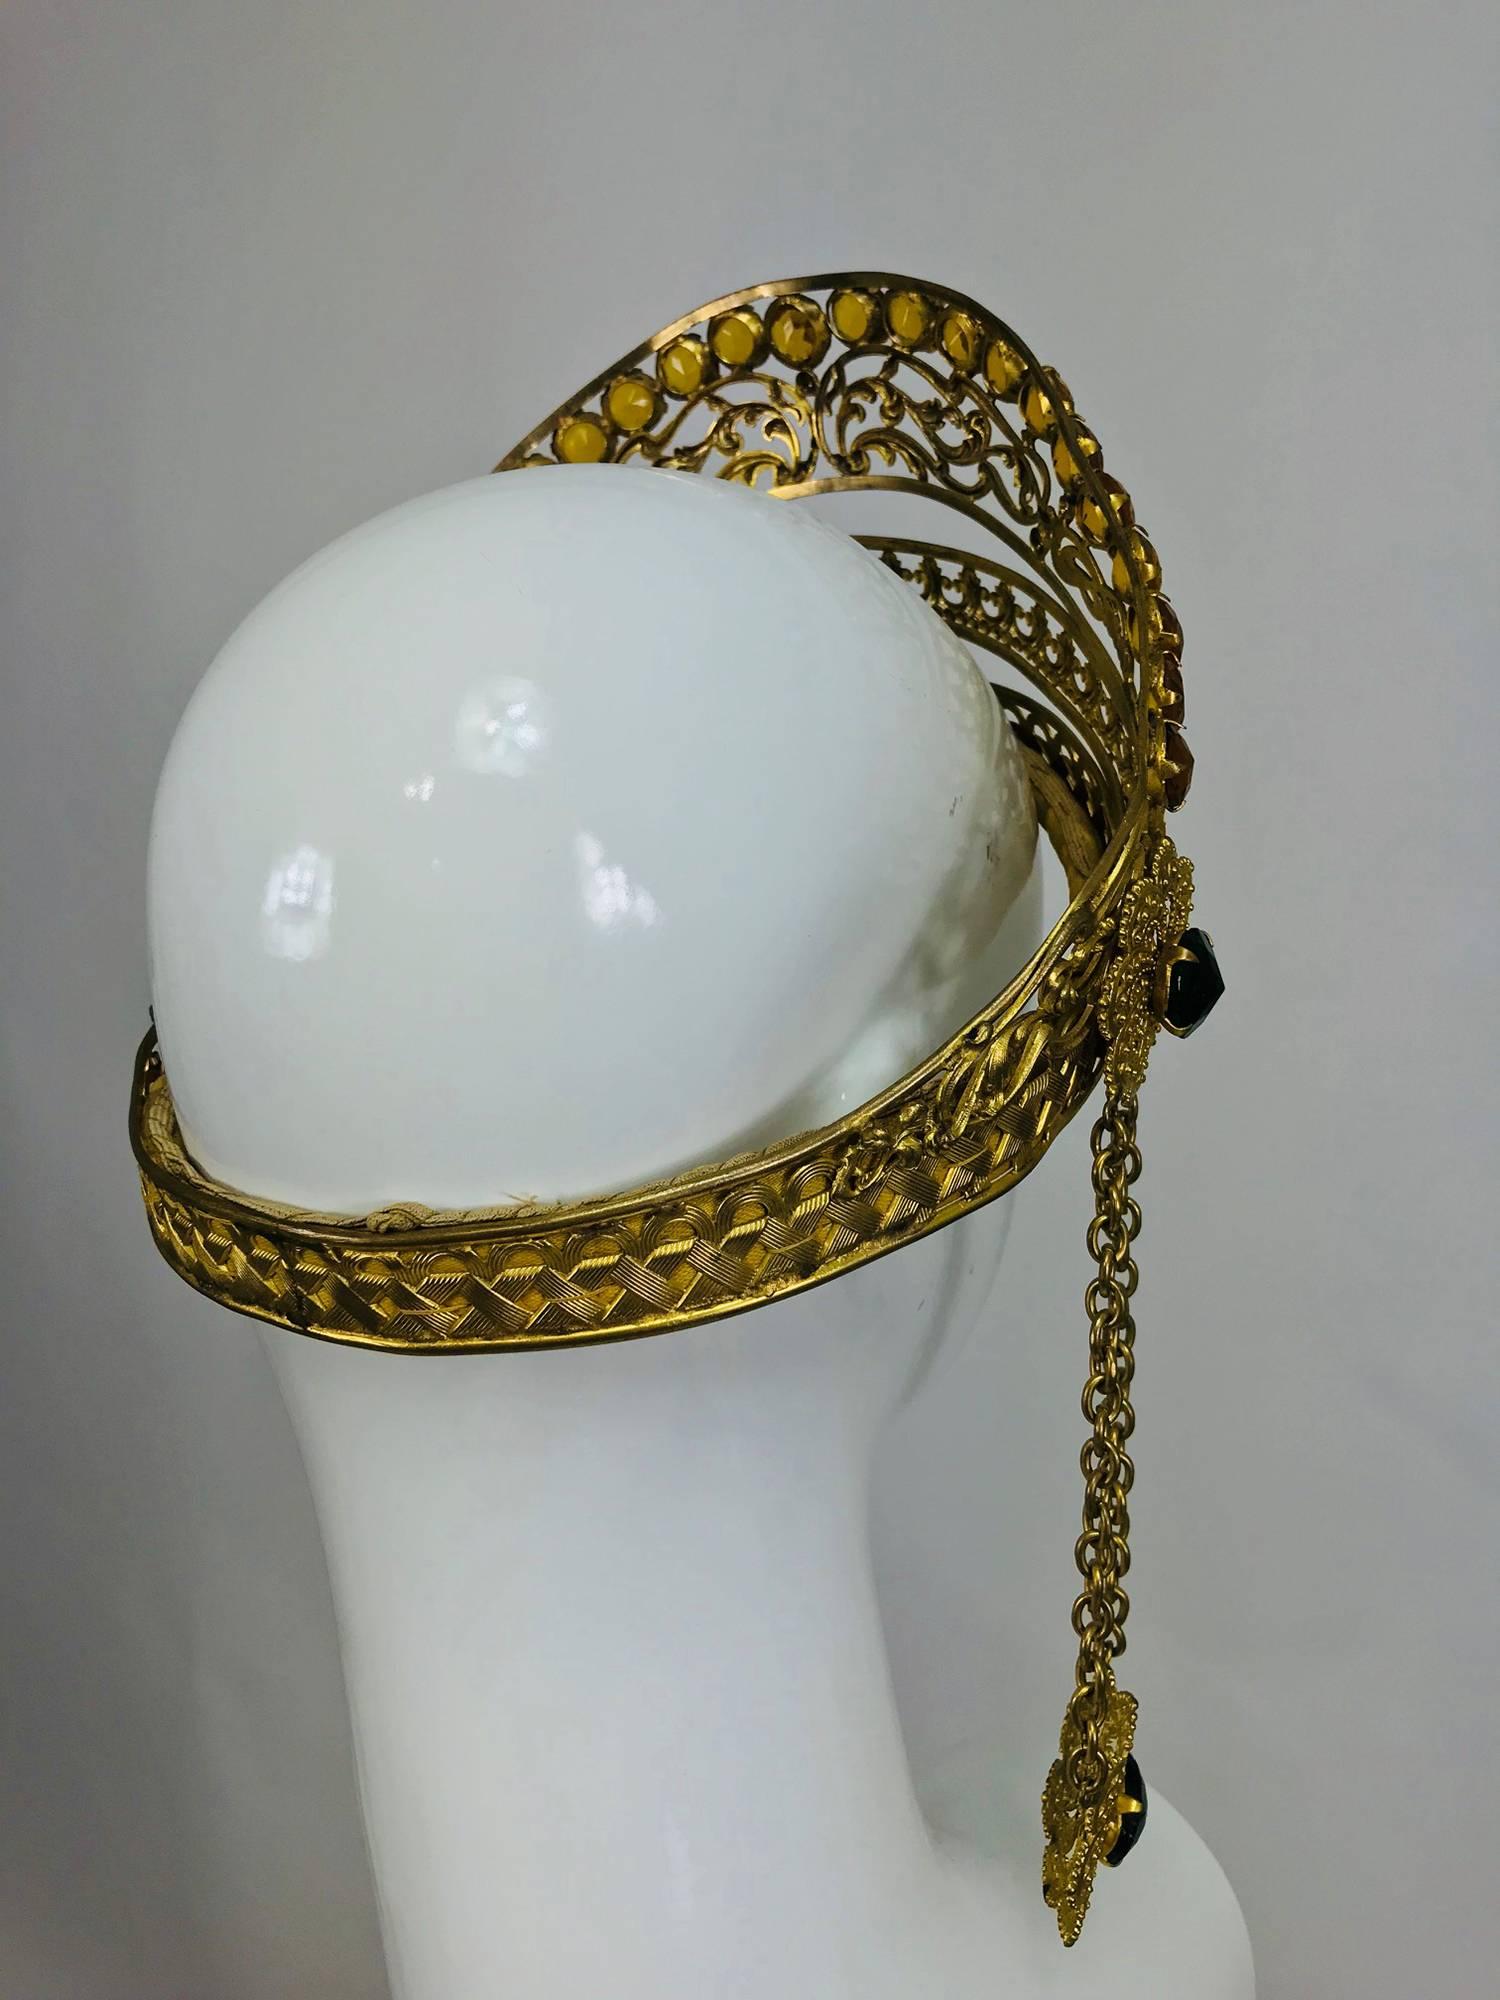 Rare Crown headdress gilt metal with jewels and side drops early 1900s 1